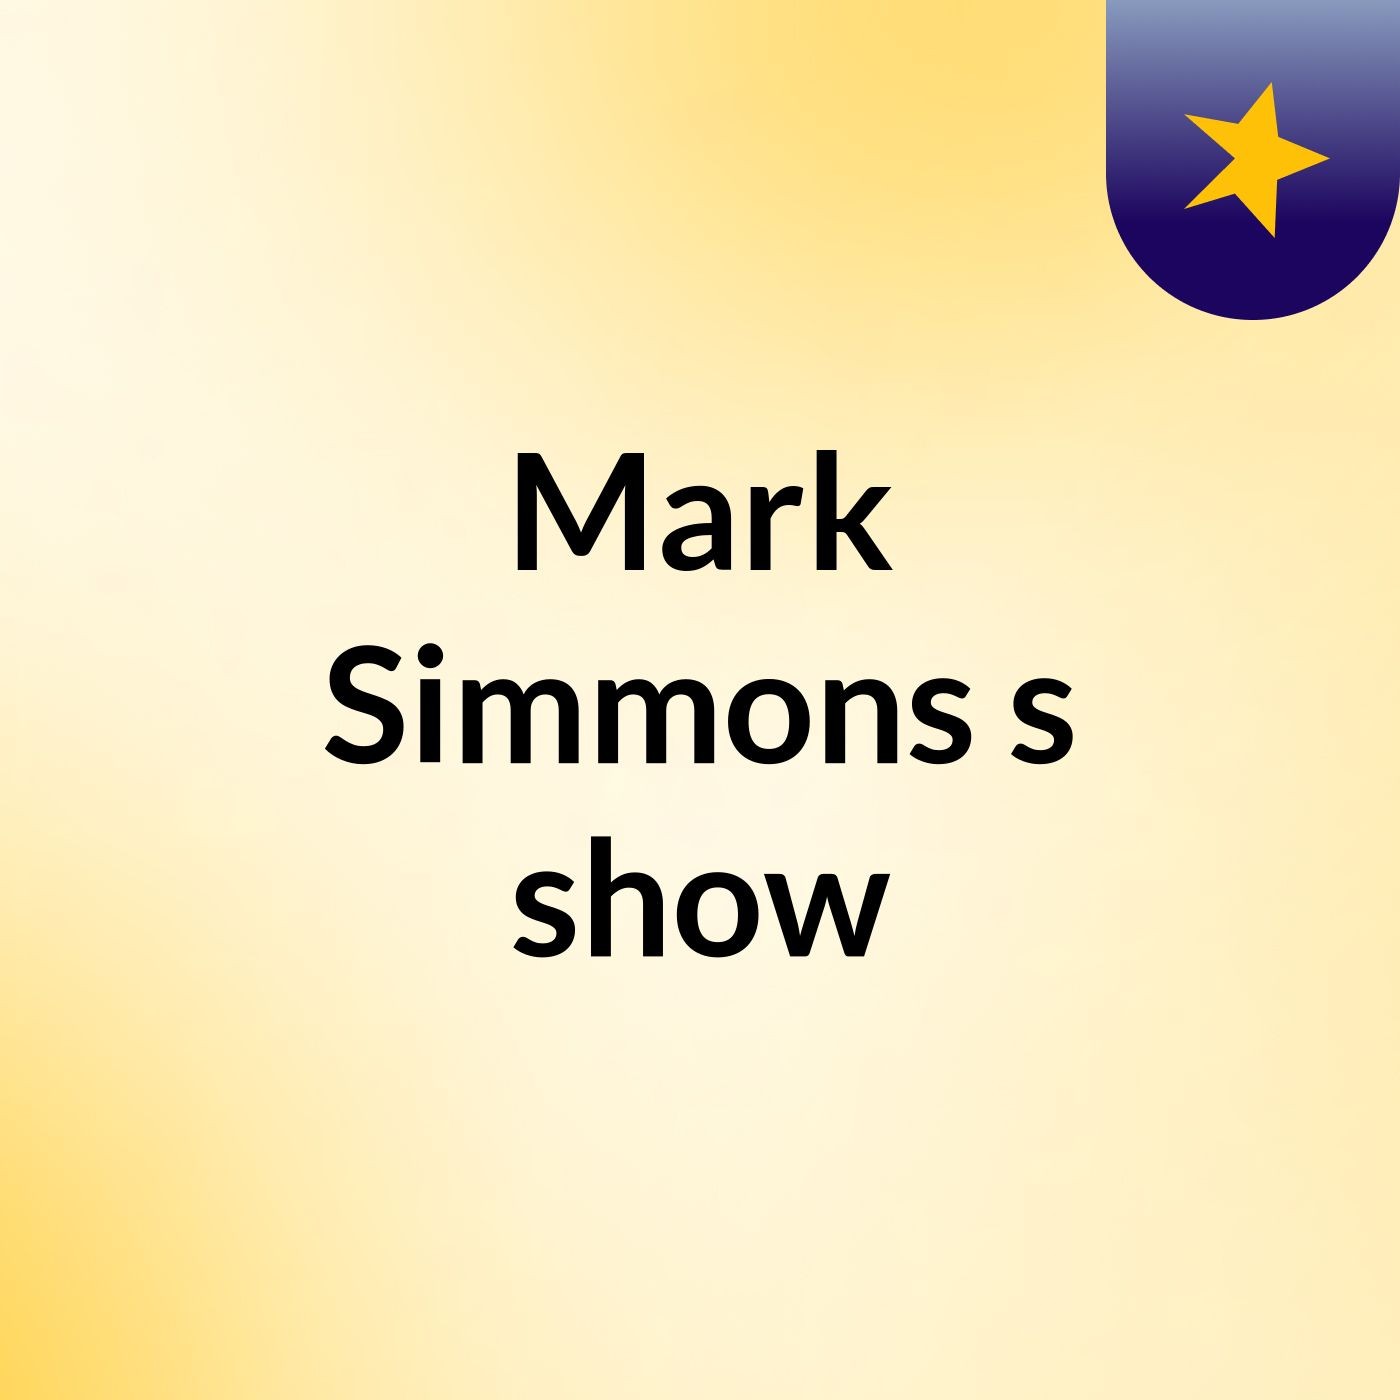 Episode 3 - Mark Simmons's show